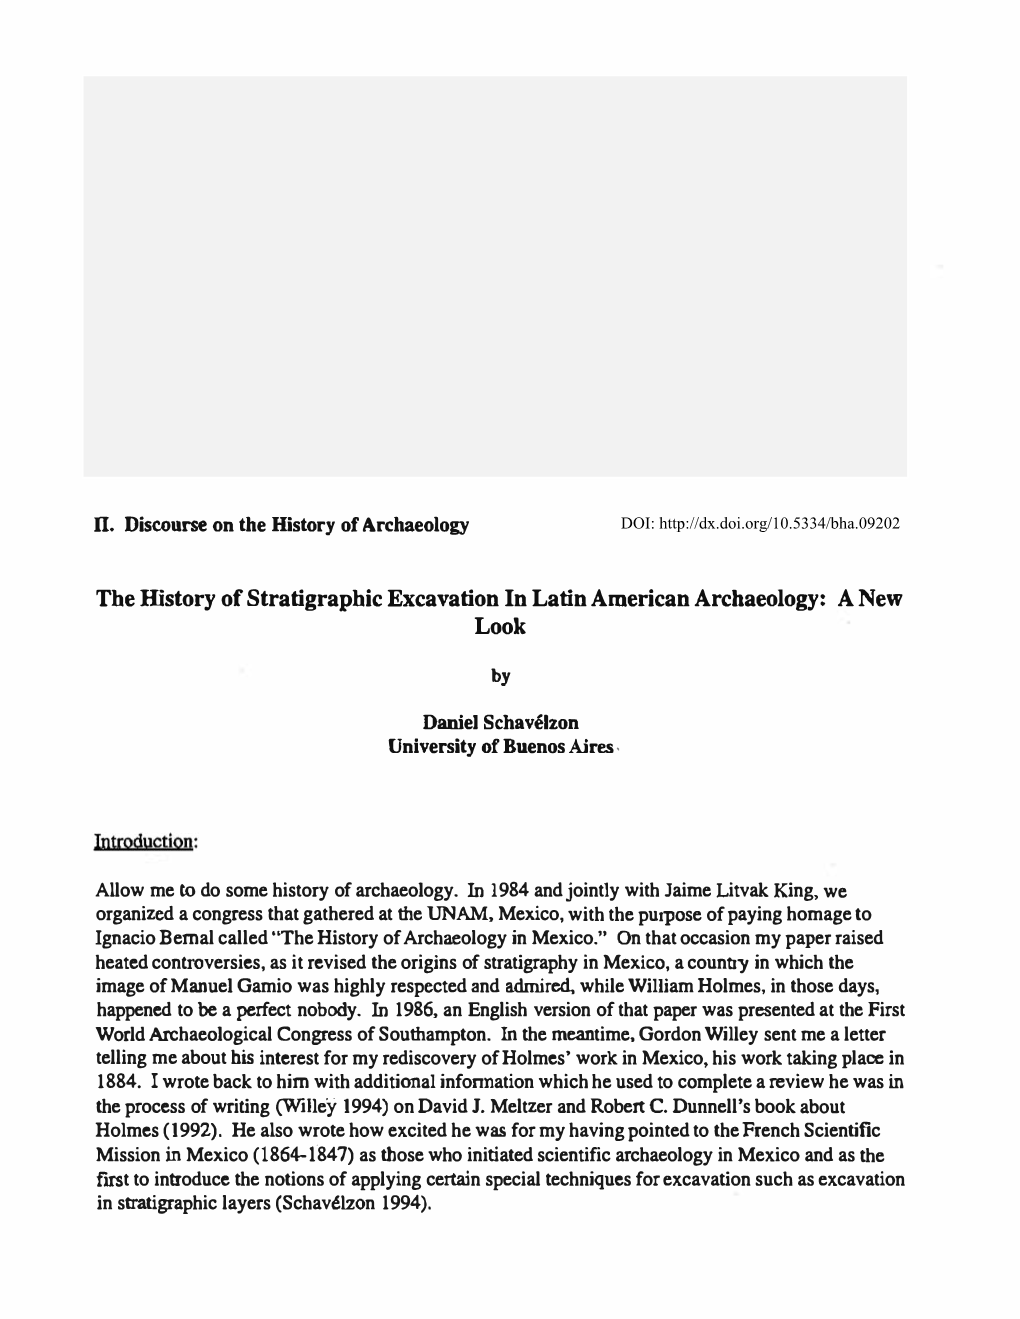 I. Editorial on the History of Archaeology by Daniel Schavilzon